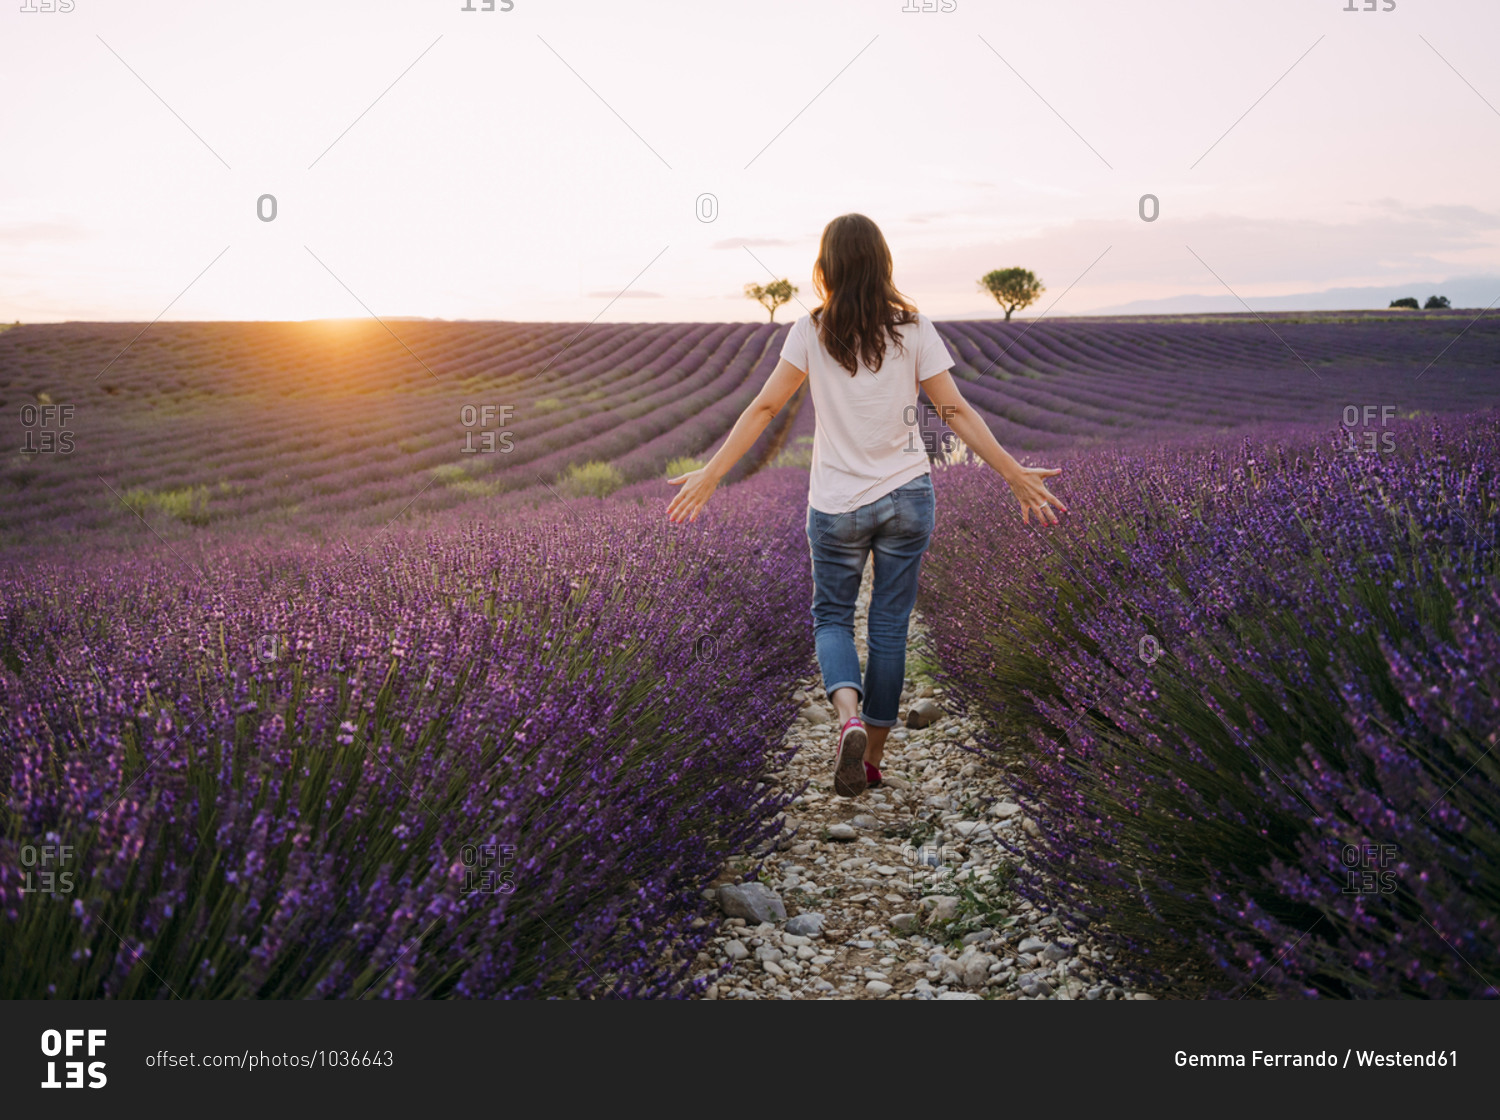 France- Valensole- back view of woman walking between blossoms of lavender field at sunset